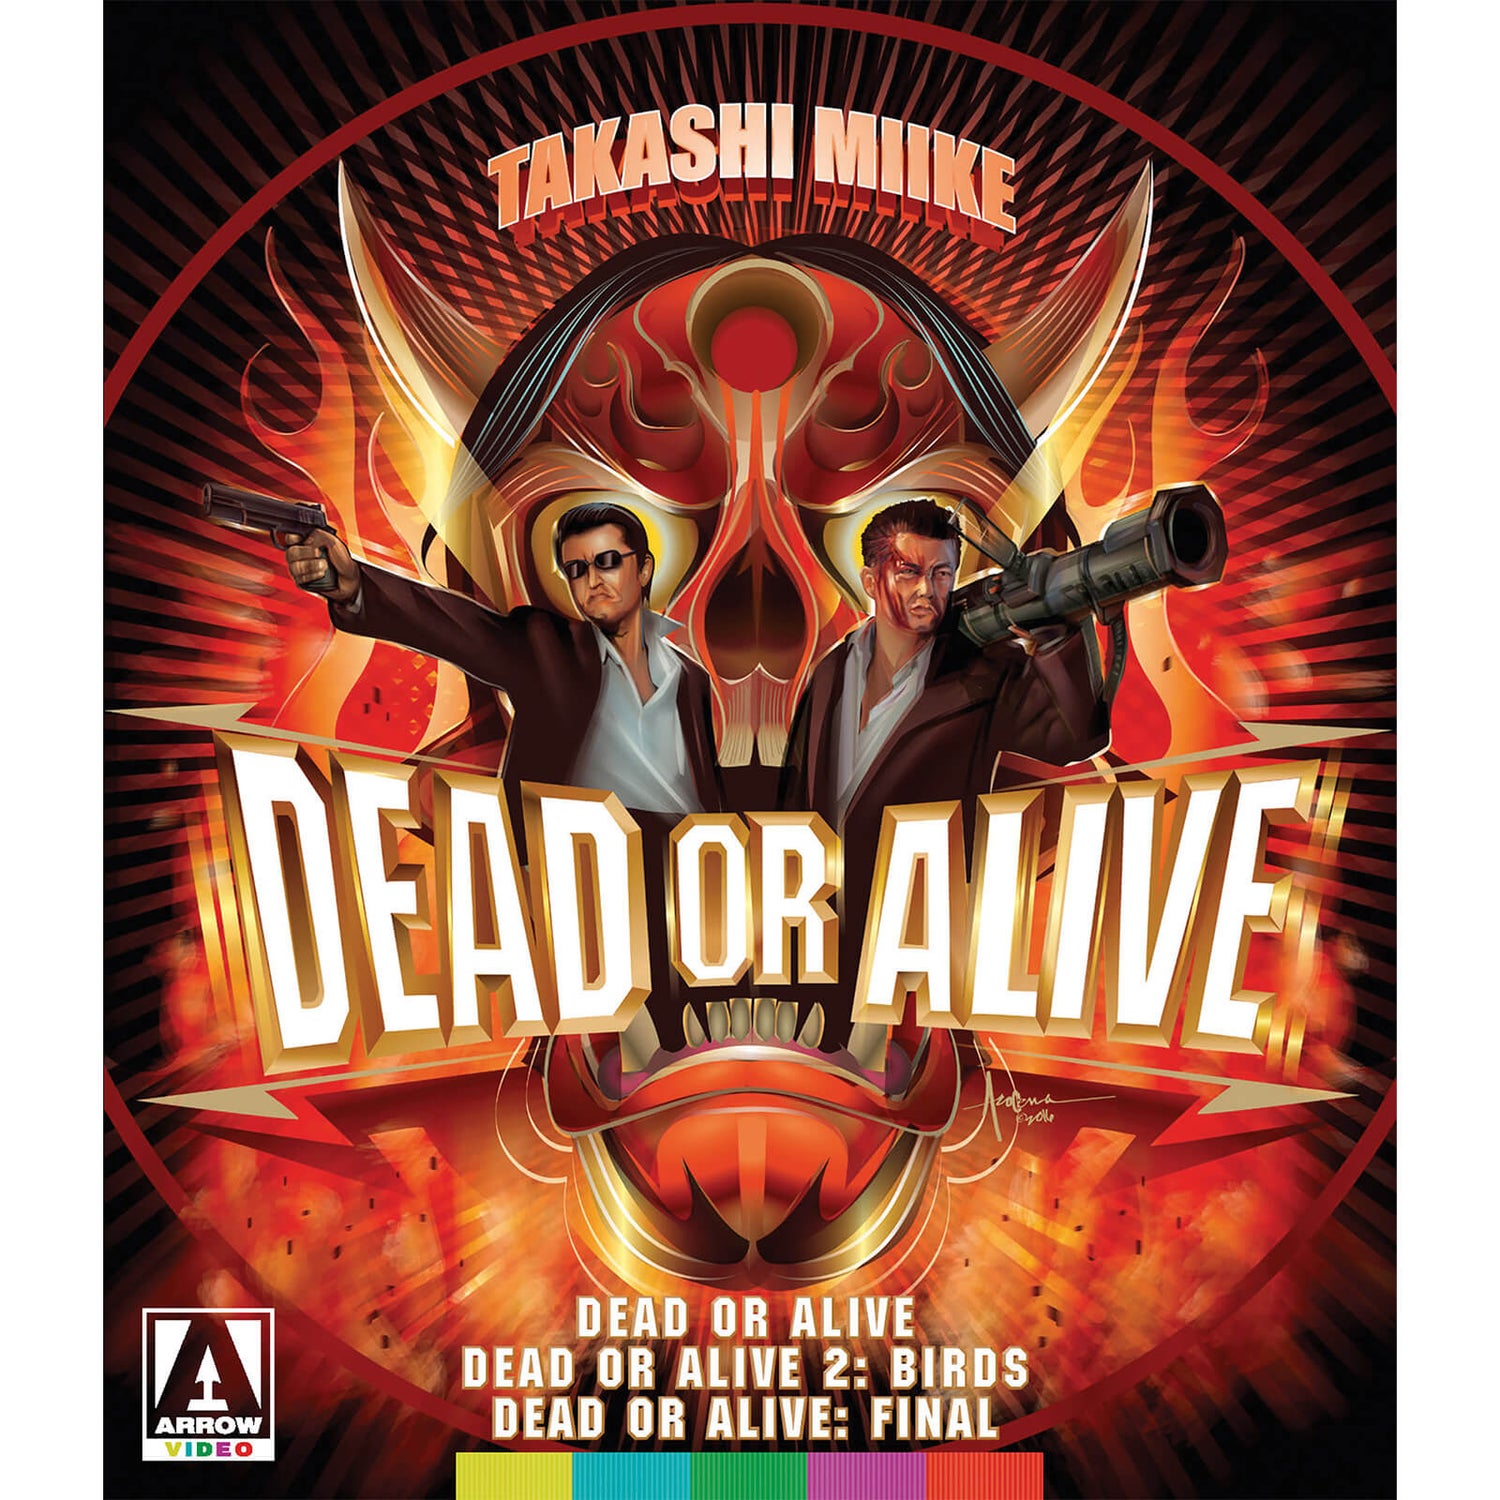 Dead Or Alive Trilogy Blu-ray